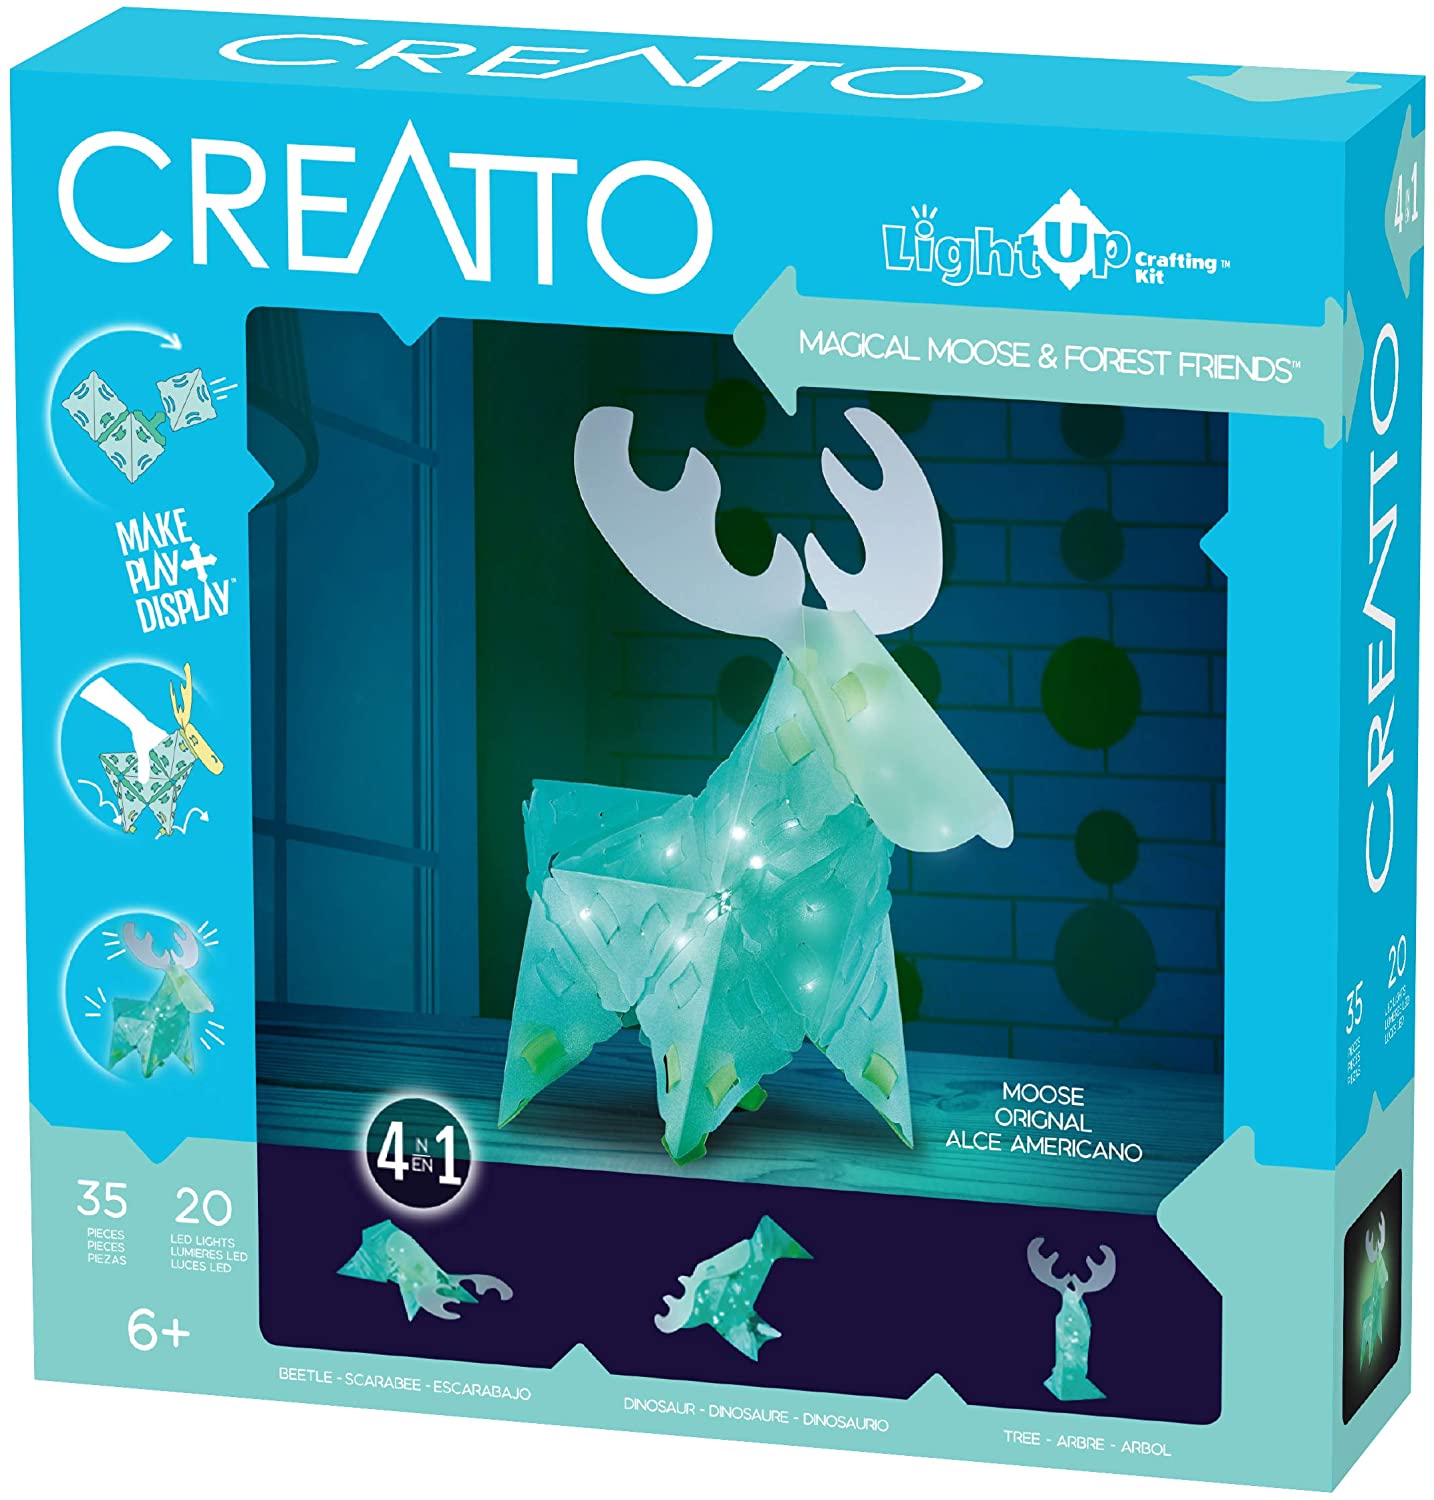 CREATTO MAGICAL MOOSE & FOREST